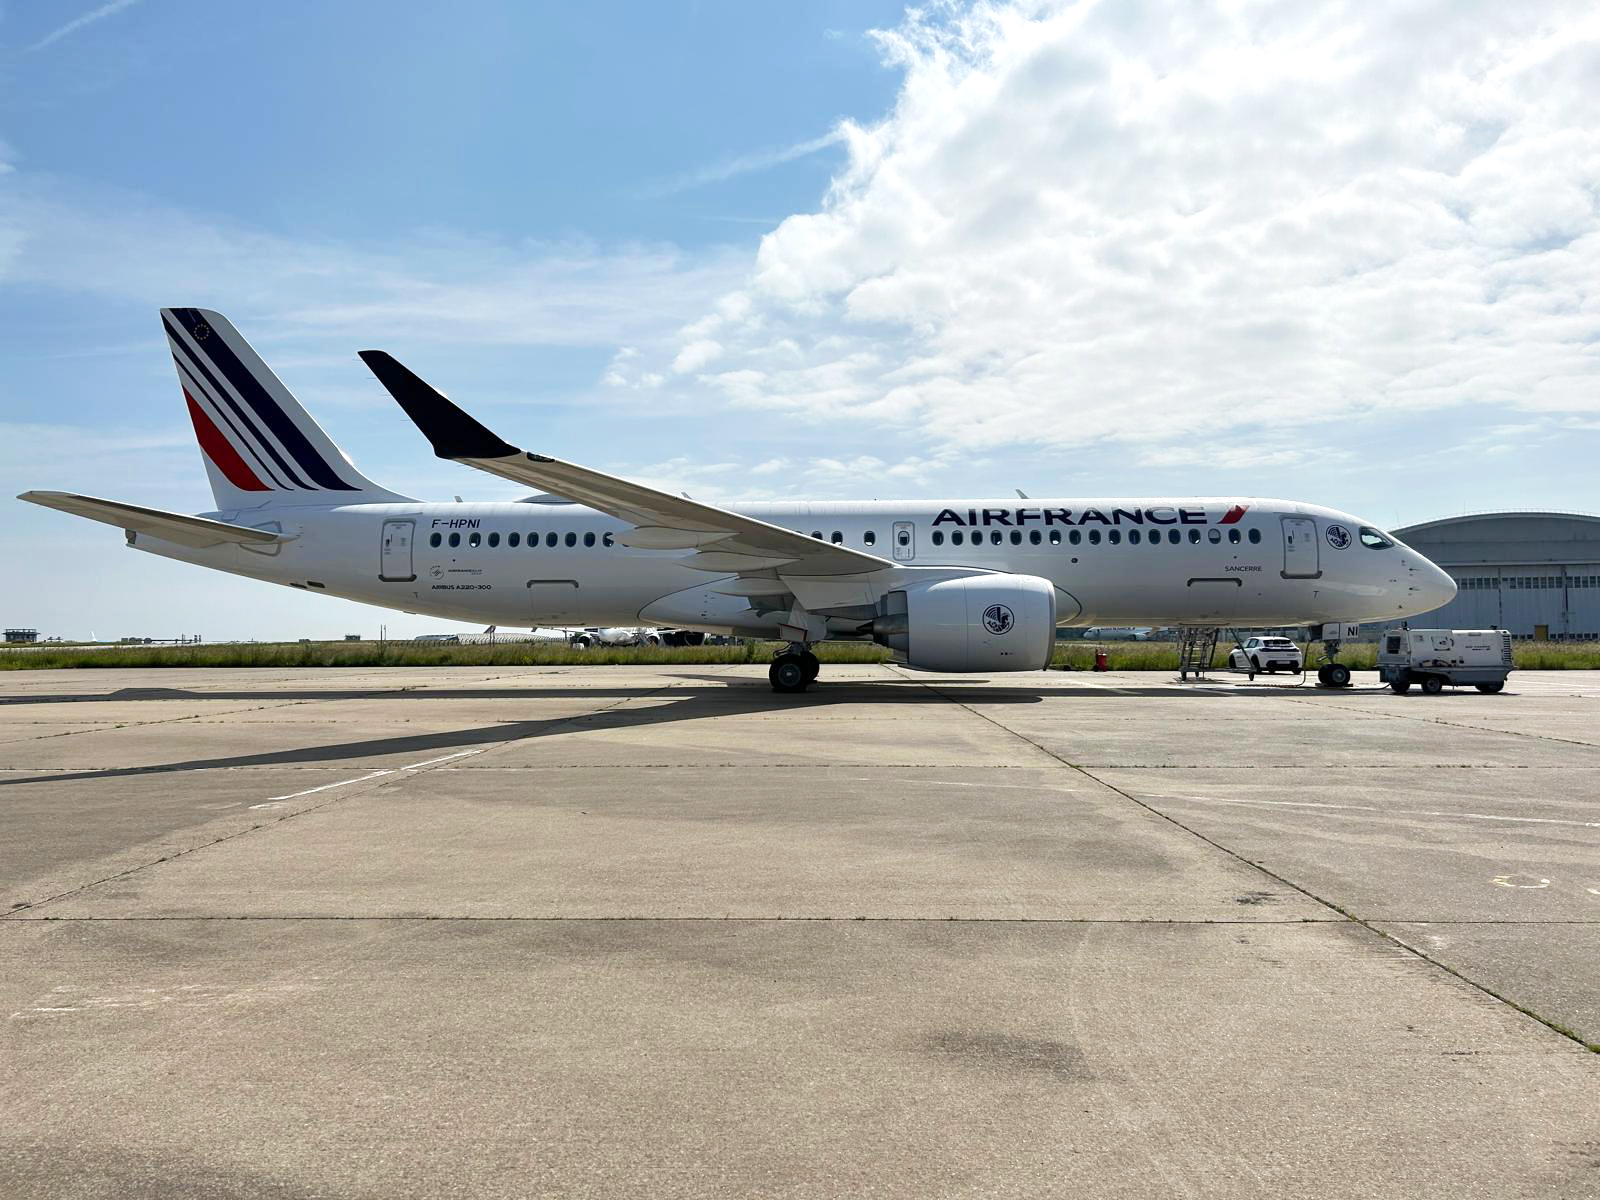 A220-300 delivery to Airfrance